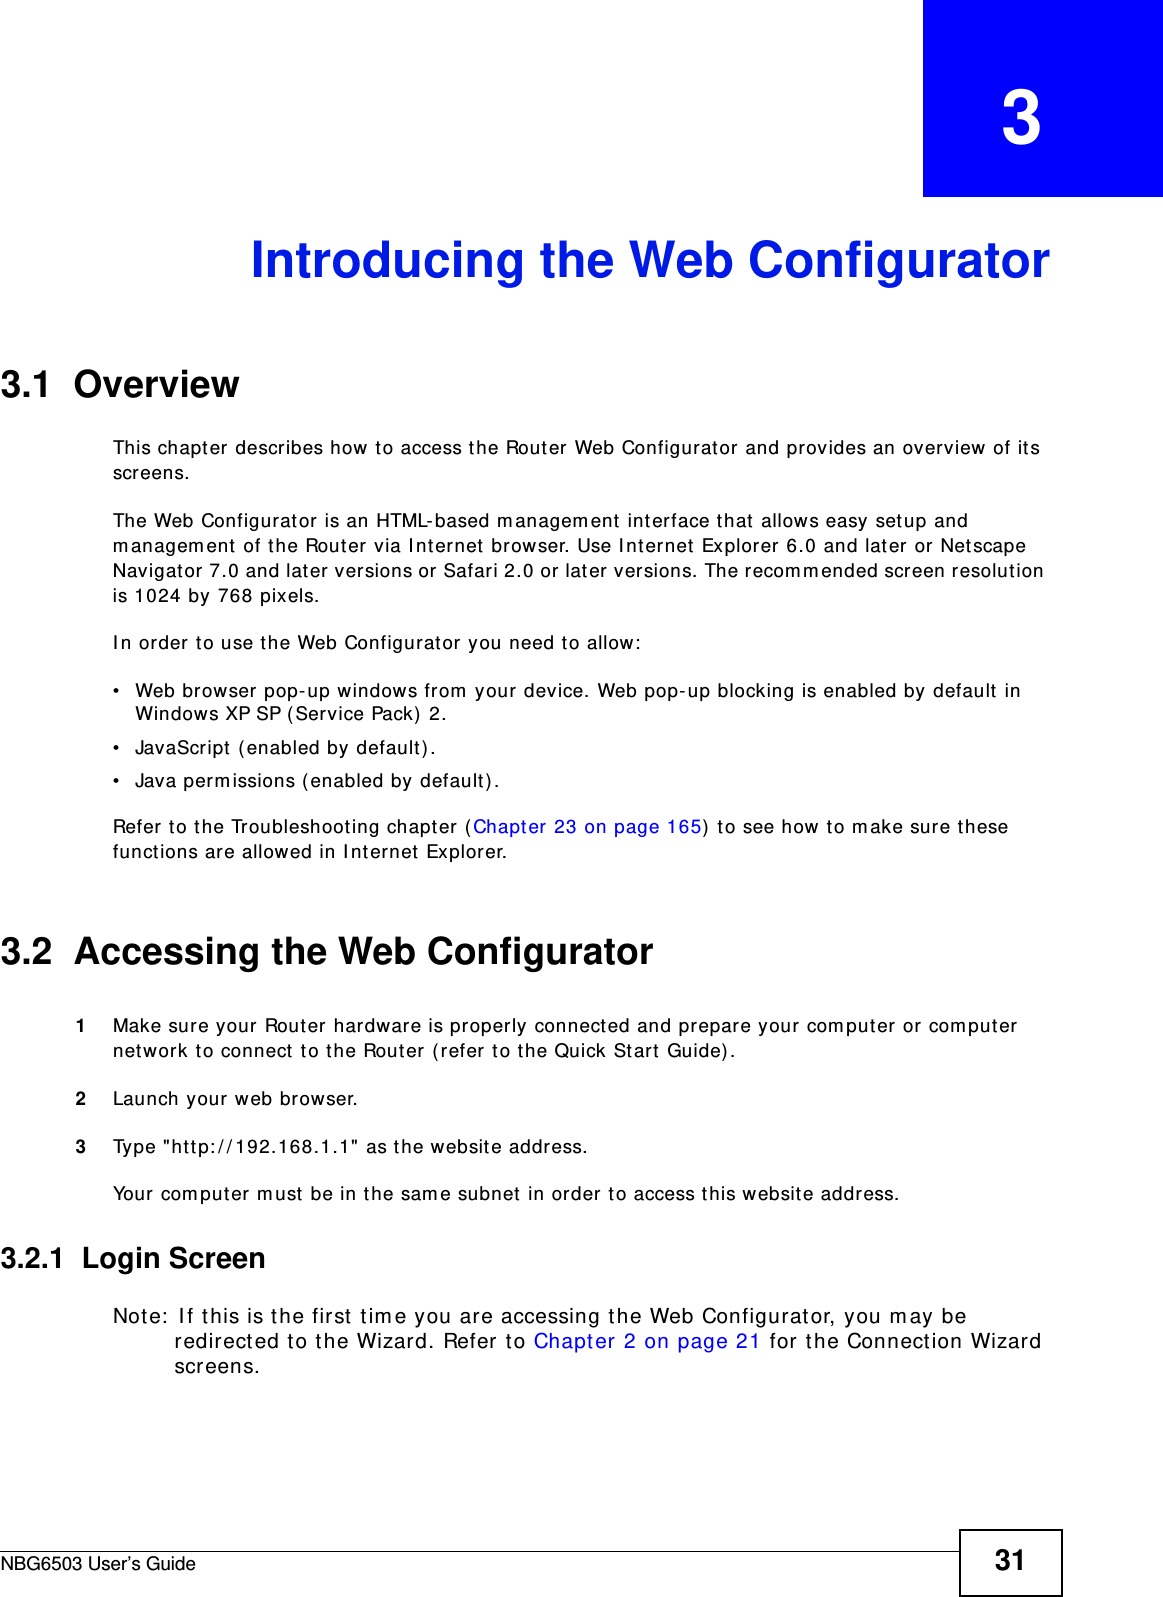 NBG6503 User’s Guide 31CHAPTER   3Introducing the Web Configurator3.1  OverviewThis chapter describes how to access the Router Web Configurator and provides an overview of its screens.The Web Configurator is an HTML-based management interface that allows easy setup and management of the Router via Internet browser. Use Internet Explorer 6.0 and later or Netscape Navigator 7.0 and later versions or Safari 2.0 or later versions. The recommended screen resolution is 1024 by 768 pixels.In order to use the Web Configurator you need to allow:• Web browser pop-up windows from your device. Web pop-up blocking is enabled by default in Windows XP SP (Service Pack) 2.• JavaScript (enabled by default).• Java permissions (enabled by default).Refer to the Troubleshooting chapter (Chapter 23 on page 165) to see how to make sure these functions are allowed in Internet Explorer.3.2  Accessing the Web Configurator1Make sure your Router hardware is properly connected and prepare your computer or computer network to connect to the Router (refer to the Quick Start Guide).2Launch your web browser.3Type &quot;http://192.168.1.1&quot; as the website address. Your computer must be in the same subnet in order to access this website address.3.2.1  Login ScreenNote: If this is the first time you are accessing the Web Configurator, you may be redirected to the Wizard. Refer to Chapter 2 on page 21 for the Connection Wizard screens. 